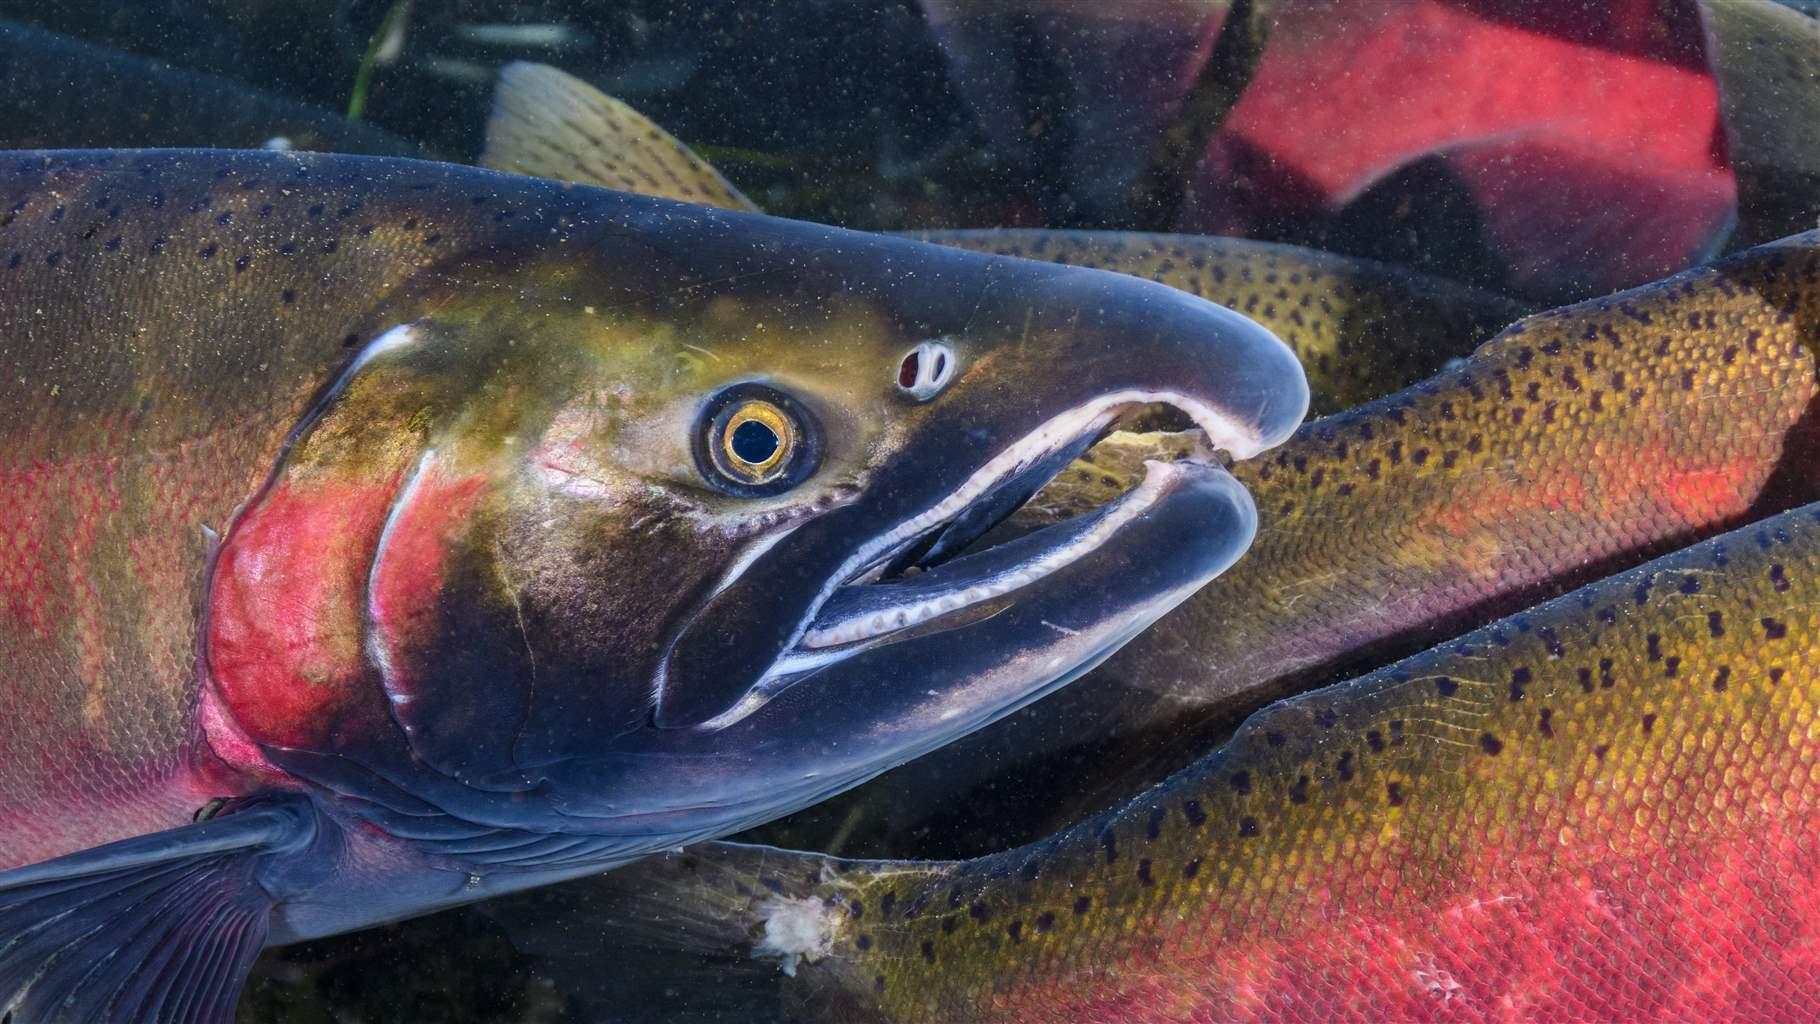 A close-up photo captures the head of a swimming salmon—with deep red, earthy green, and dark hues, accented by light freckles. The backs of numerous other salmon, all crowded together, are visible immediately behind. 